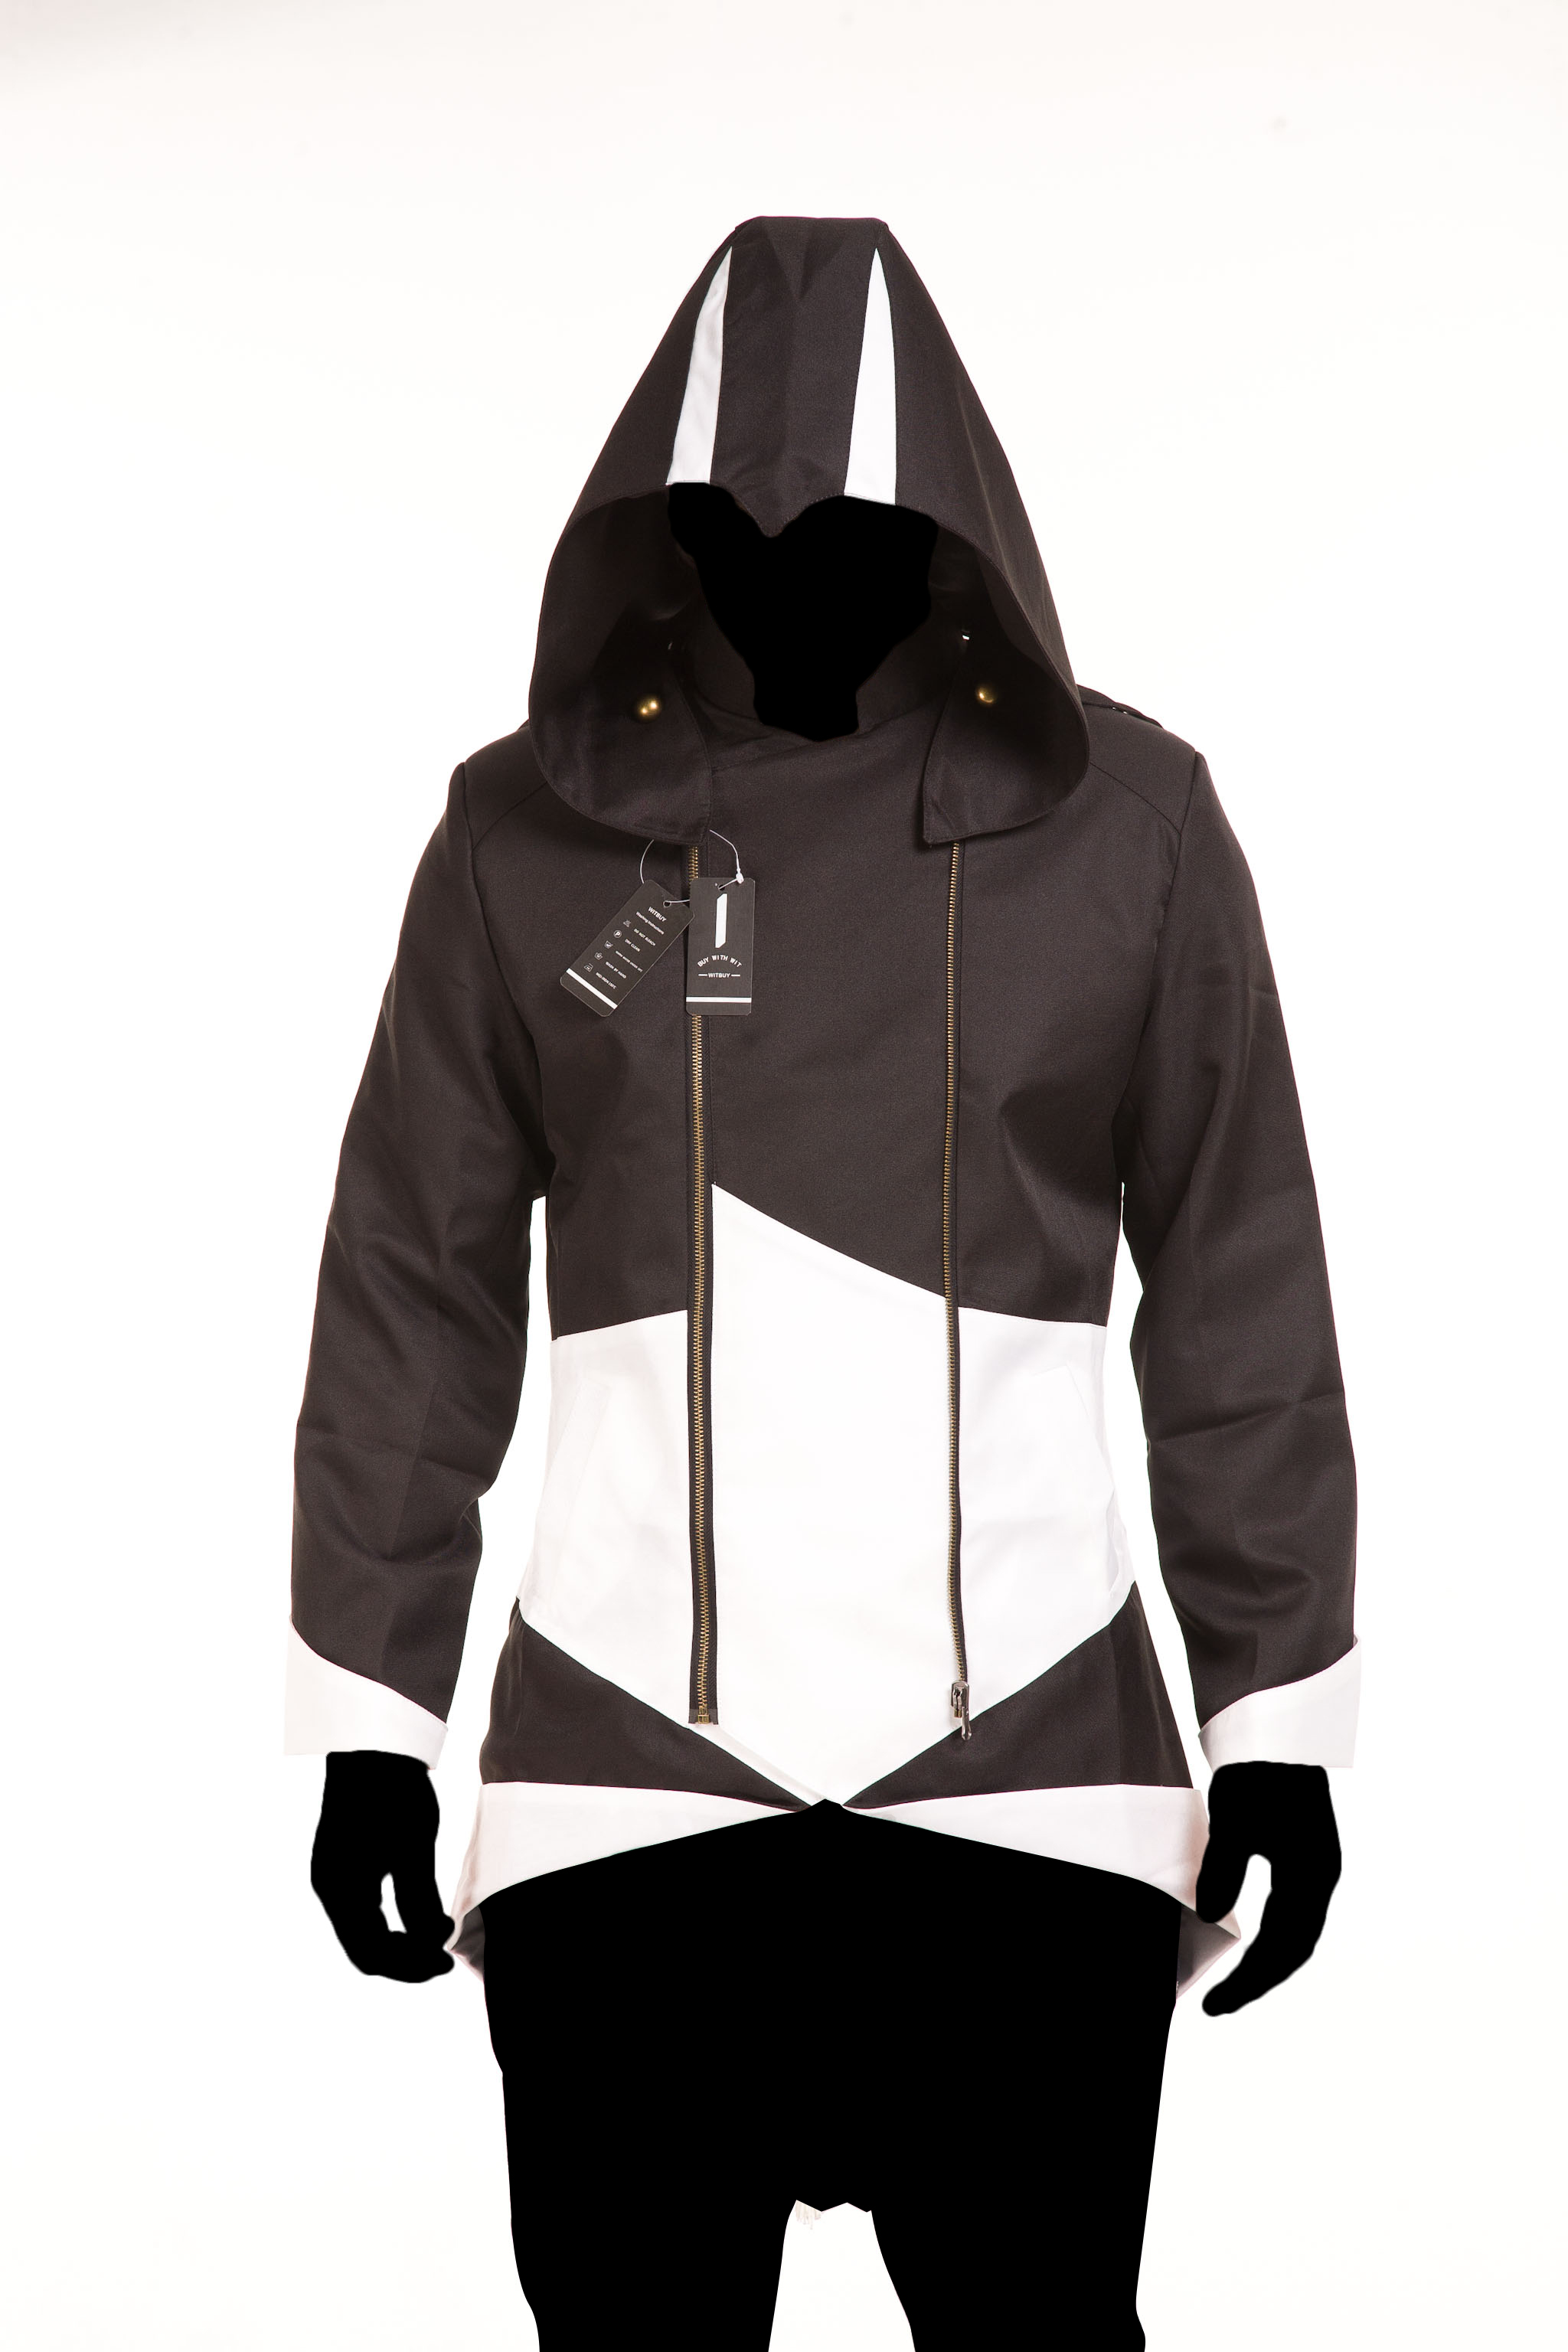 Assassin's Creed 3 Connor Kenway Coat Jacket Hoodie Black White - Click Image to Close